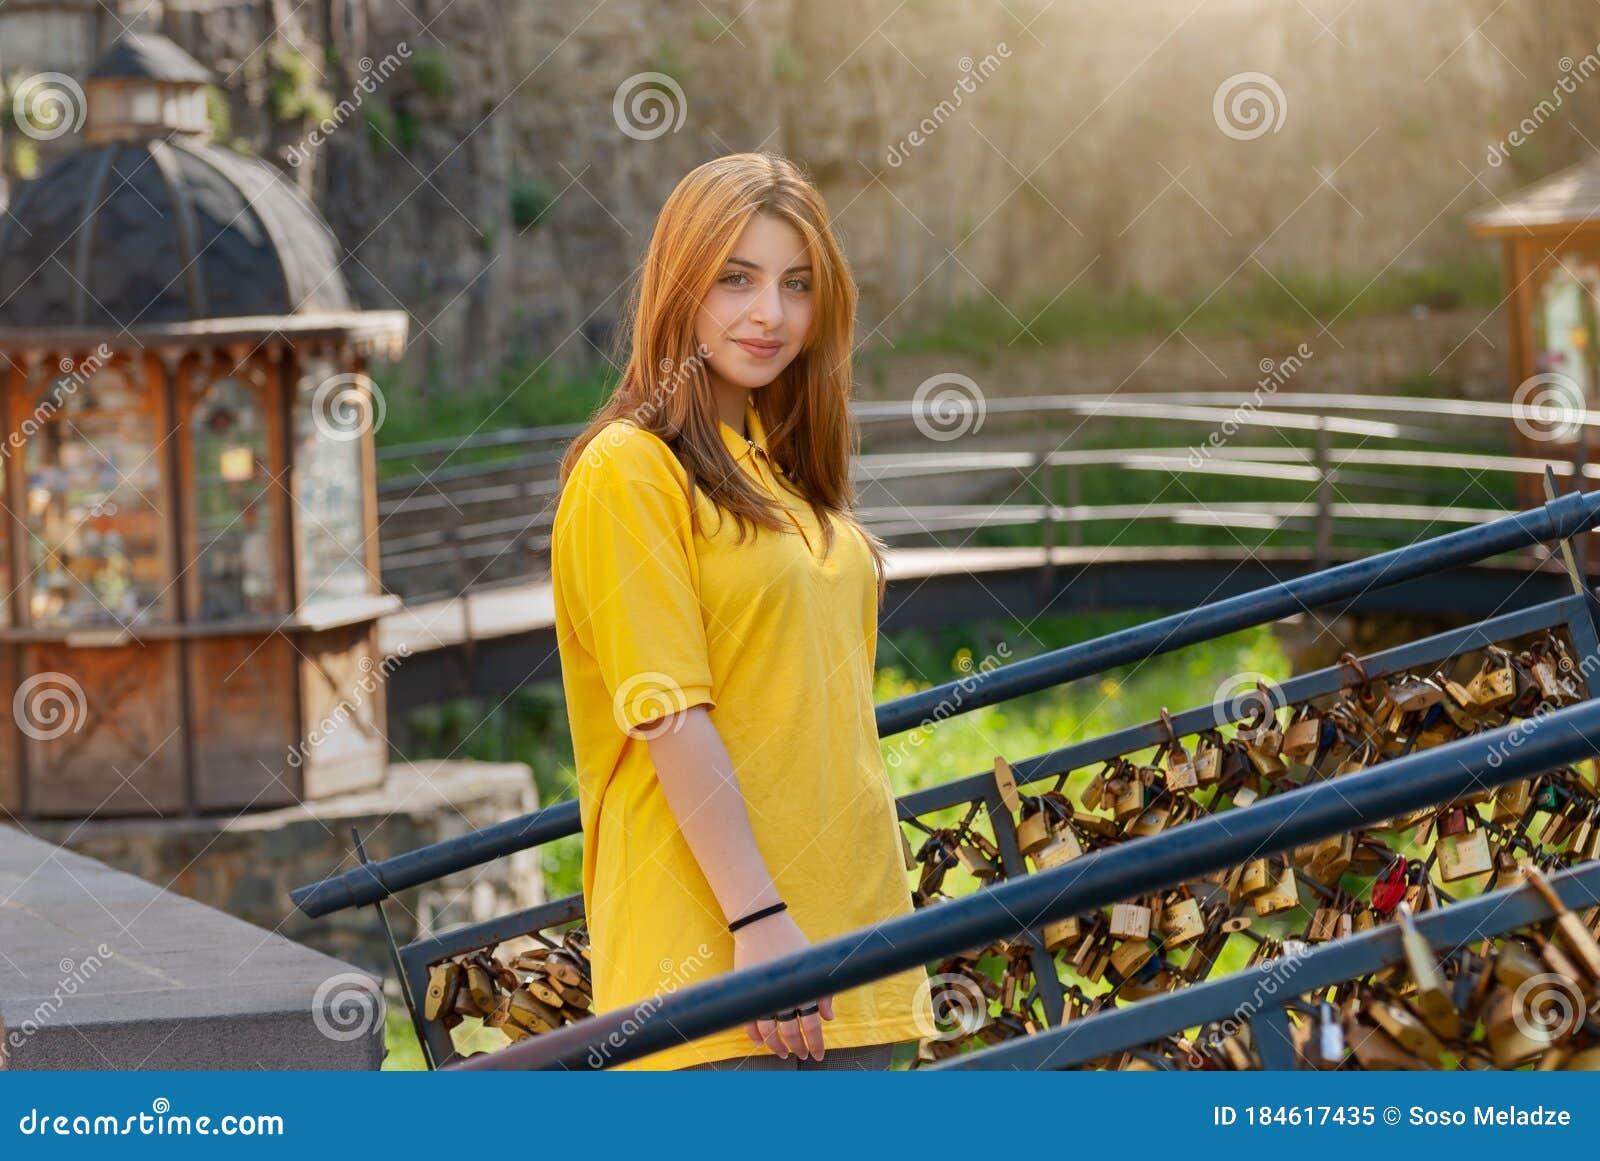 Beautiful Teenage Girl In Yellow Shirt In Old City Park Stock Image 